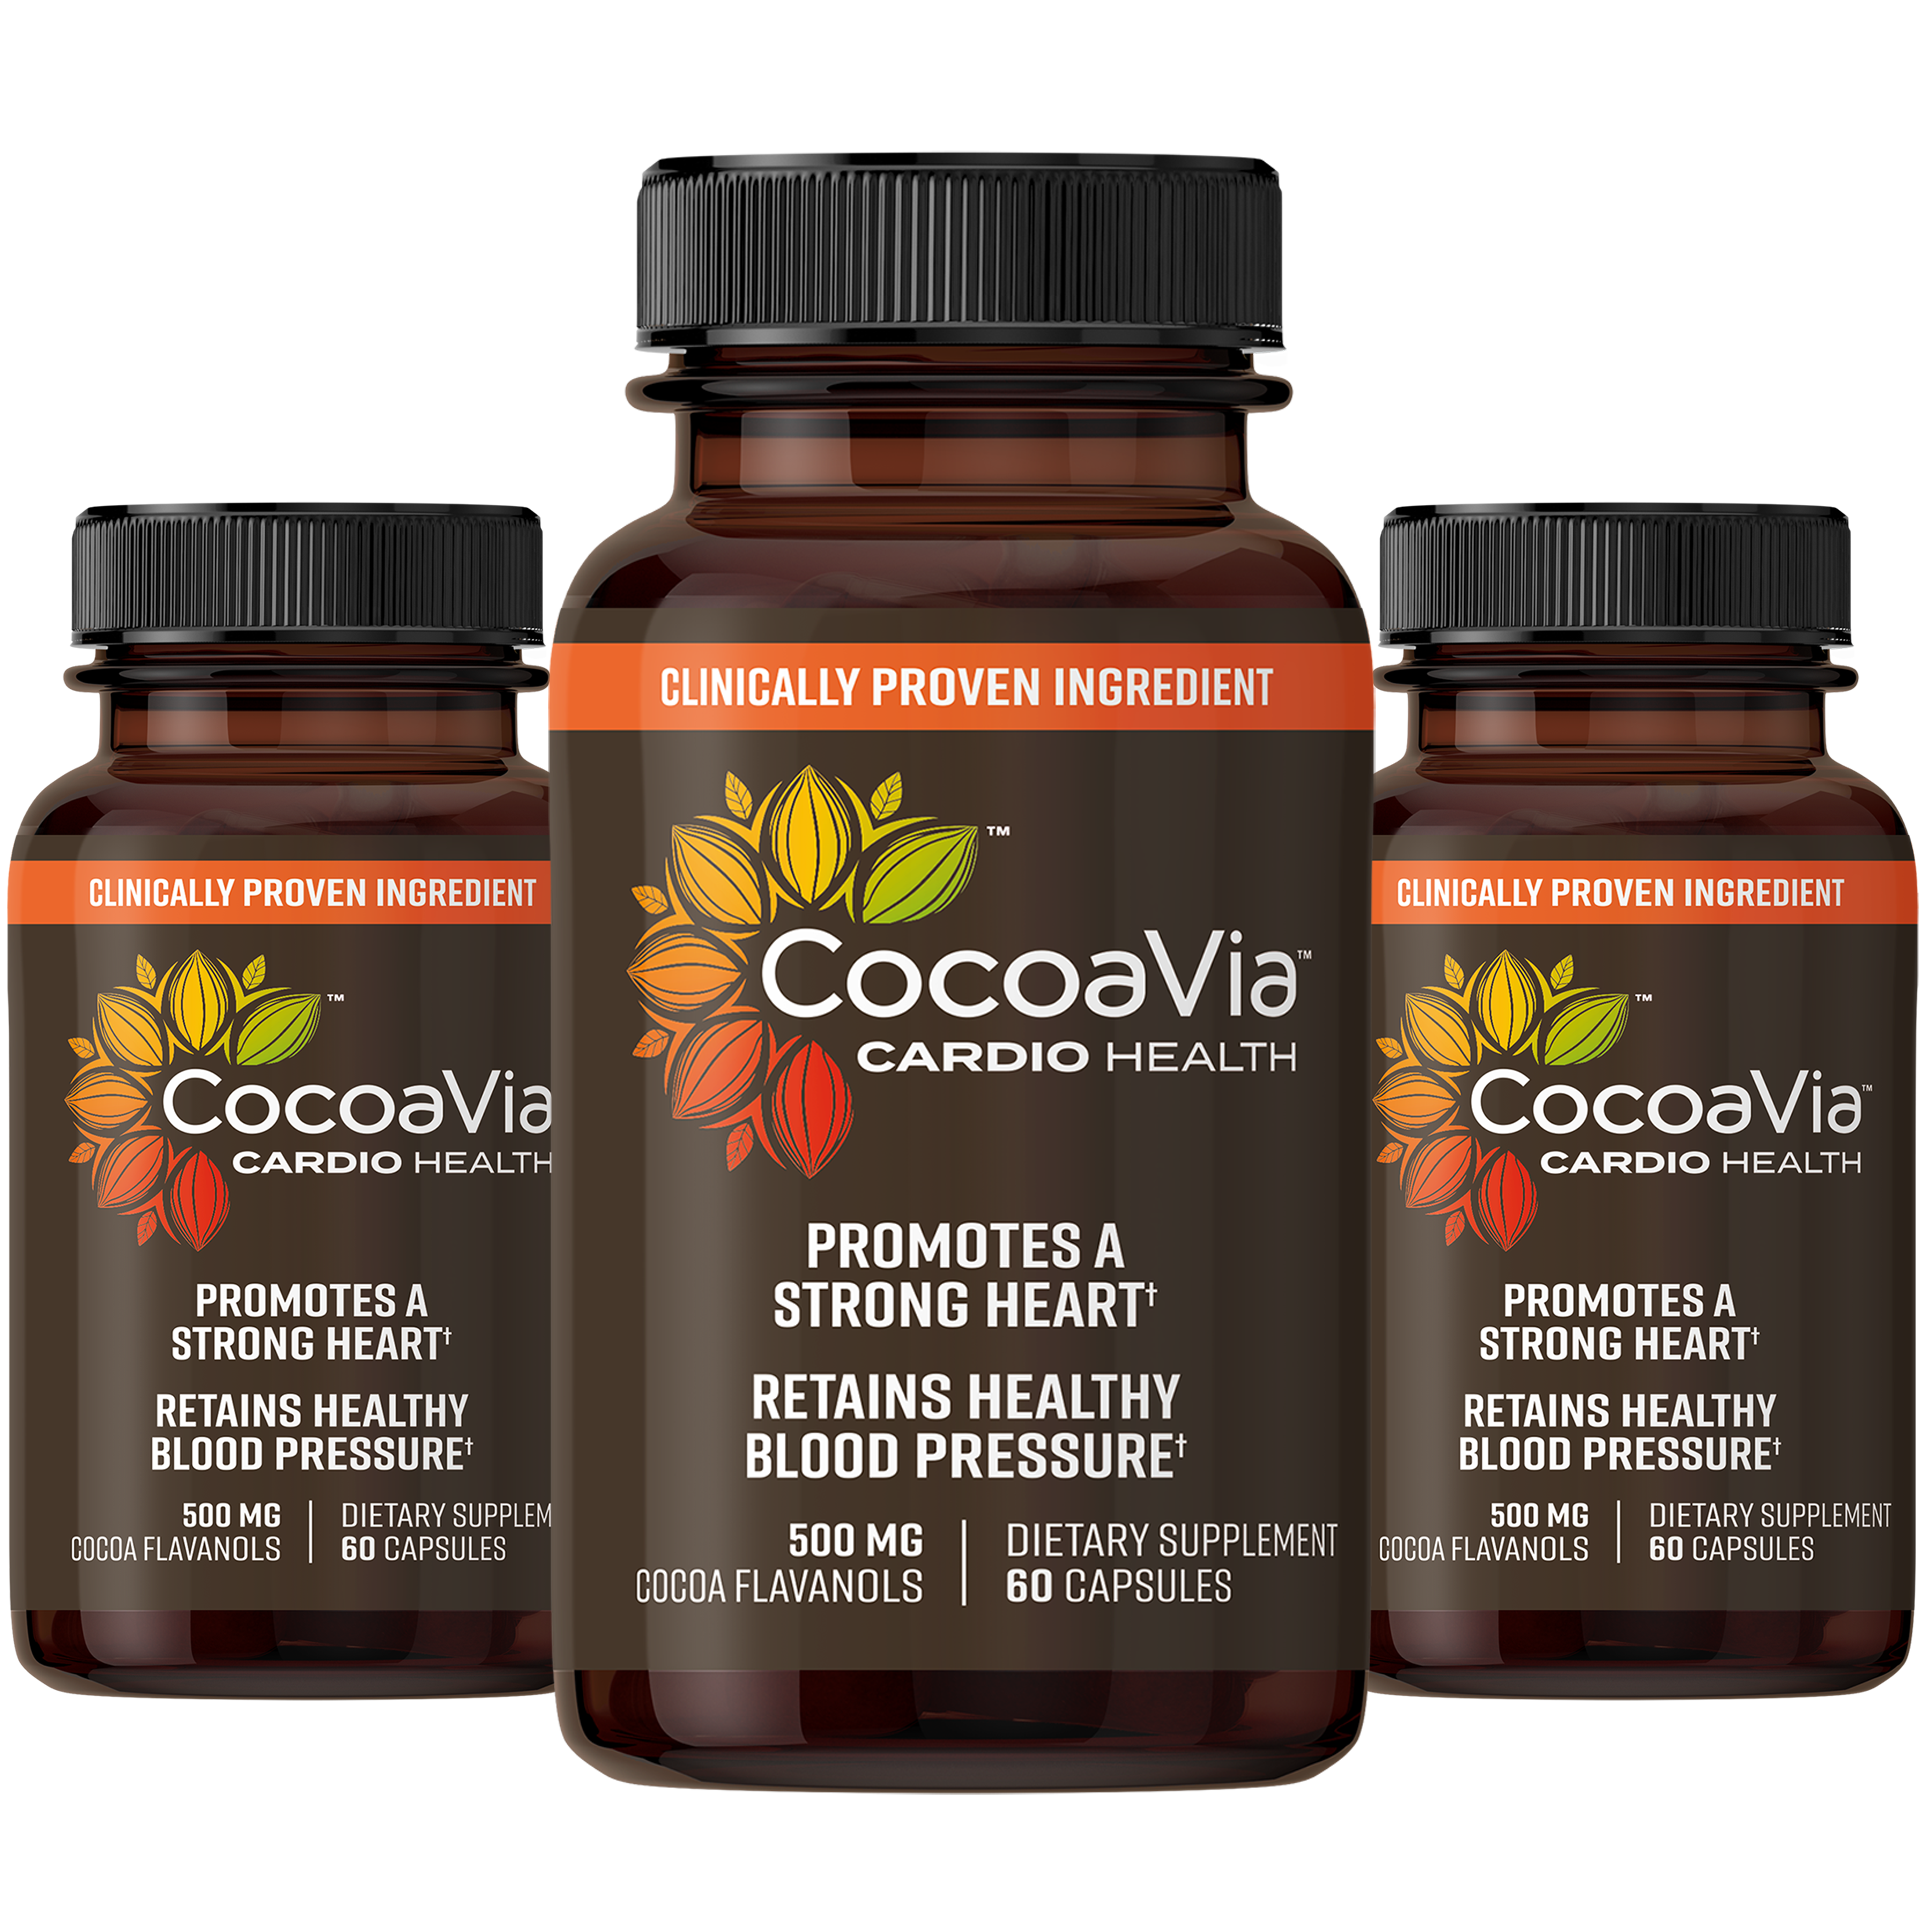 CocoaVia Cardio Health Capsules. Clinically Proven Ingredient. 500 mg of Cocoa Flavanols Promotes A Strong Heart & Cardiovascular System. Dietary Supplements. 190 Capsules for 90 days. 